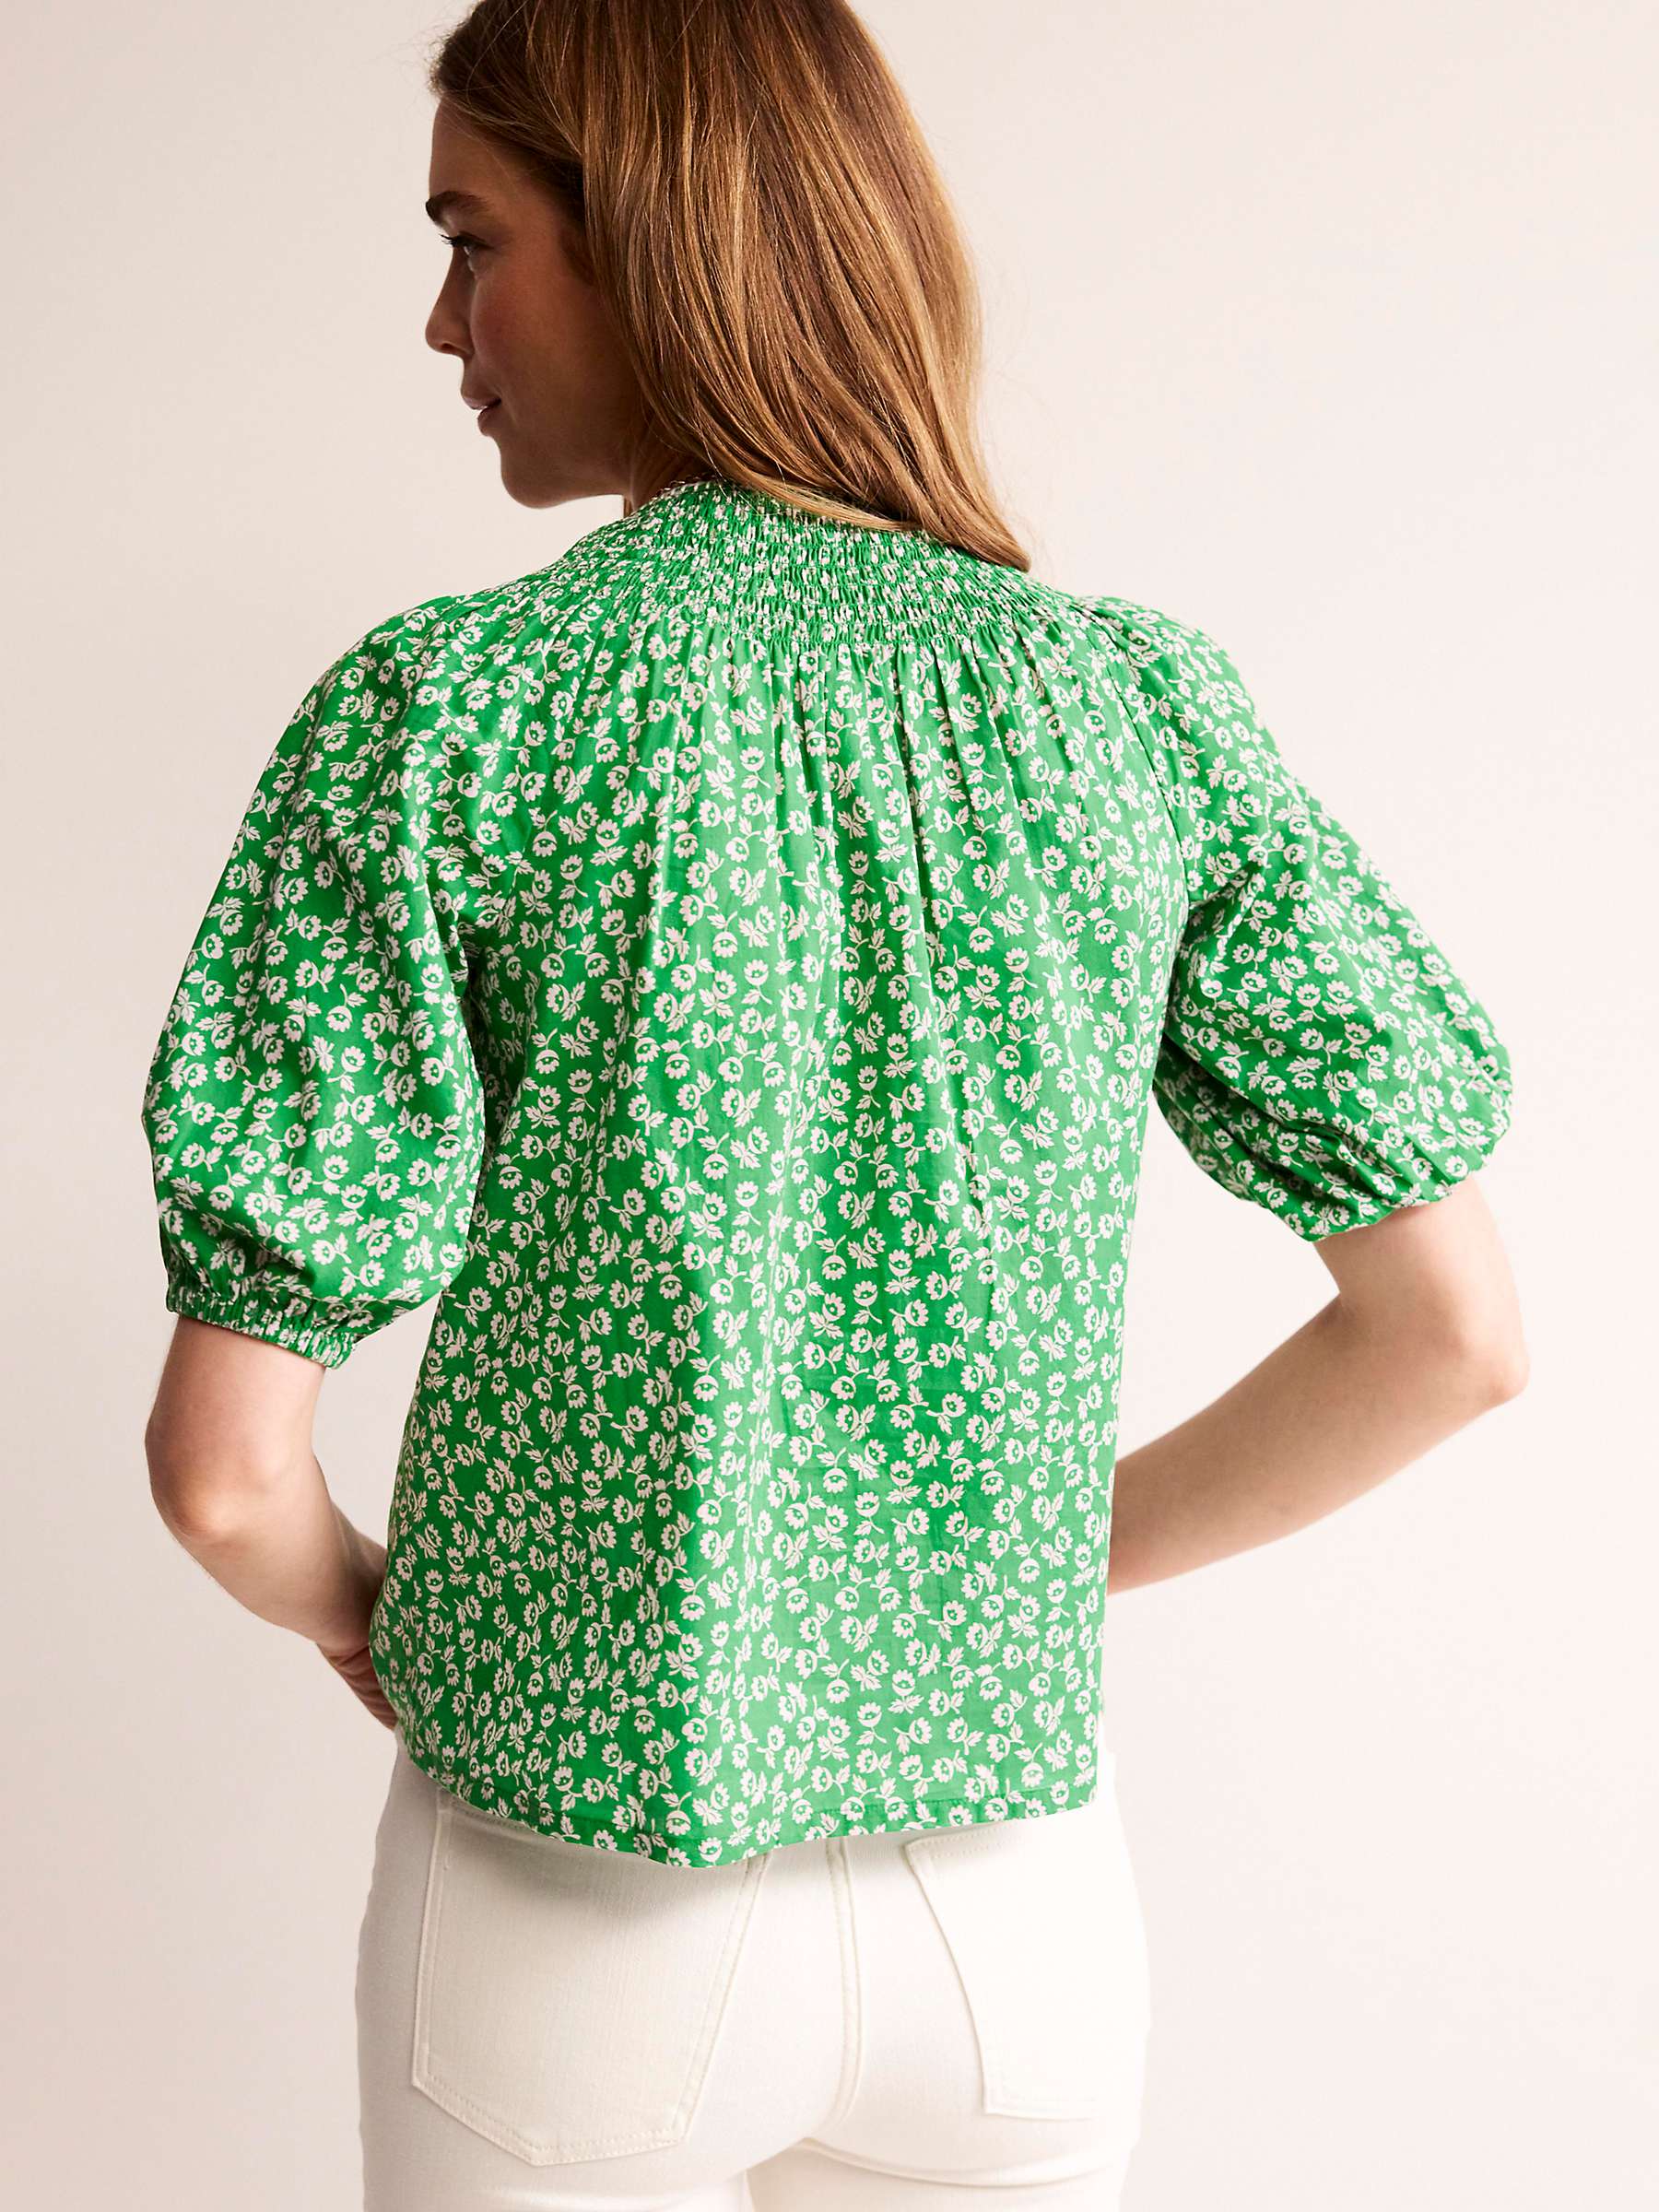 Buy Boden Easy Stitch Ditsy Bud Floral Top, Green Online at johnlewis.com